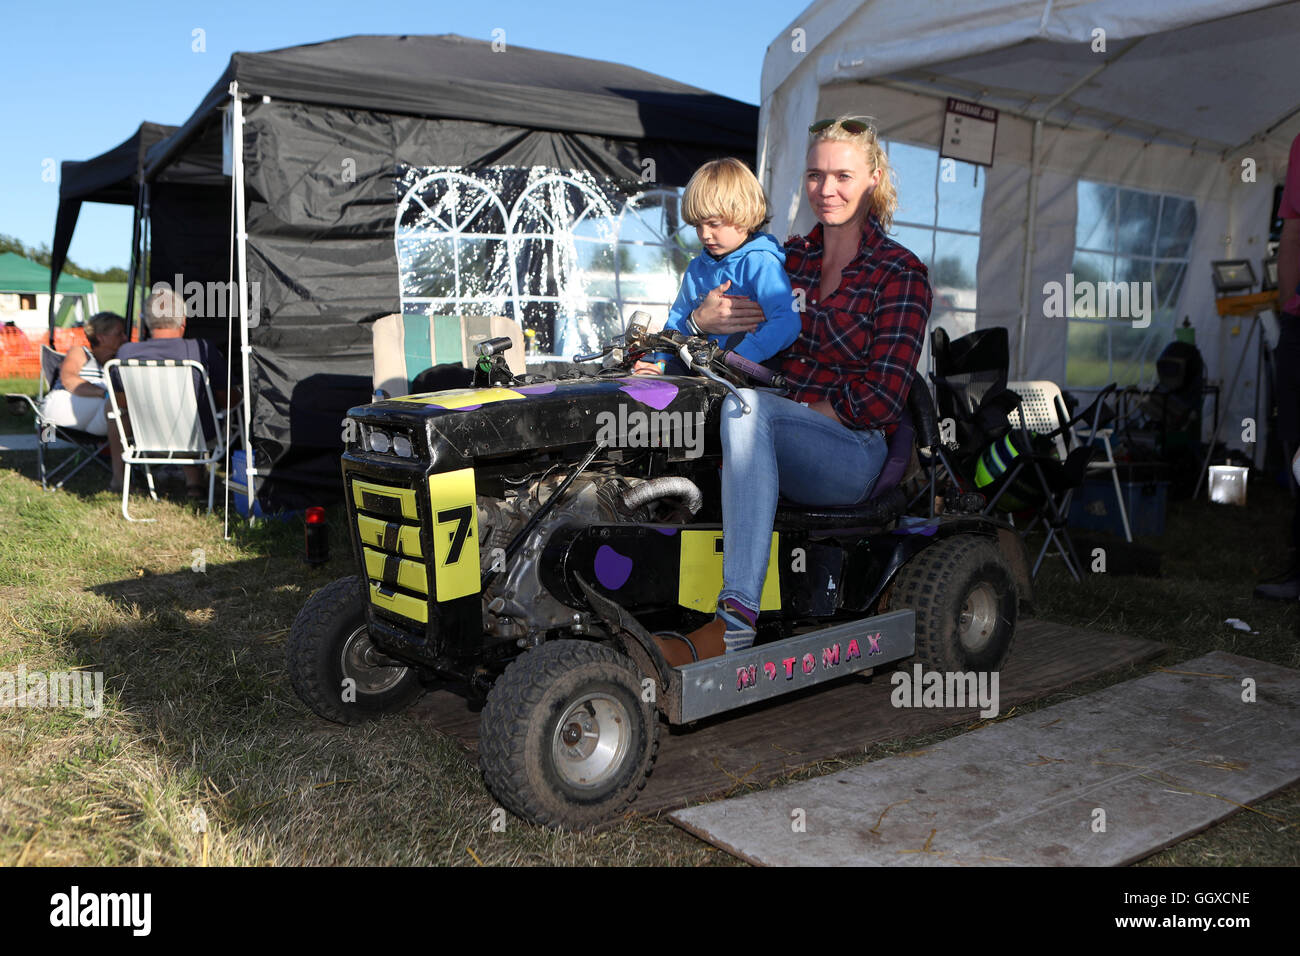 Model Jodie Kidd with son Indio at the BLMRA 12 Hour Lawn Mower Race near Five Oaks, west Sussex. Stock Photo